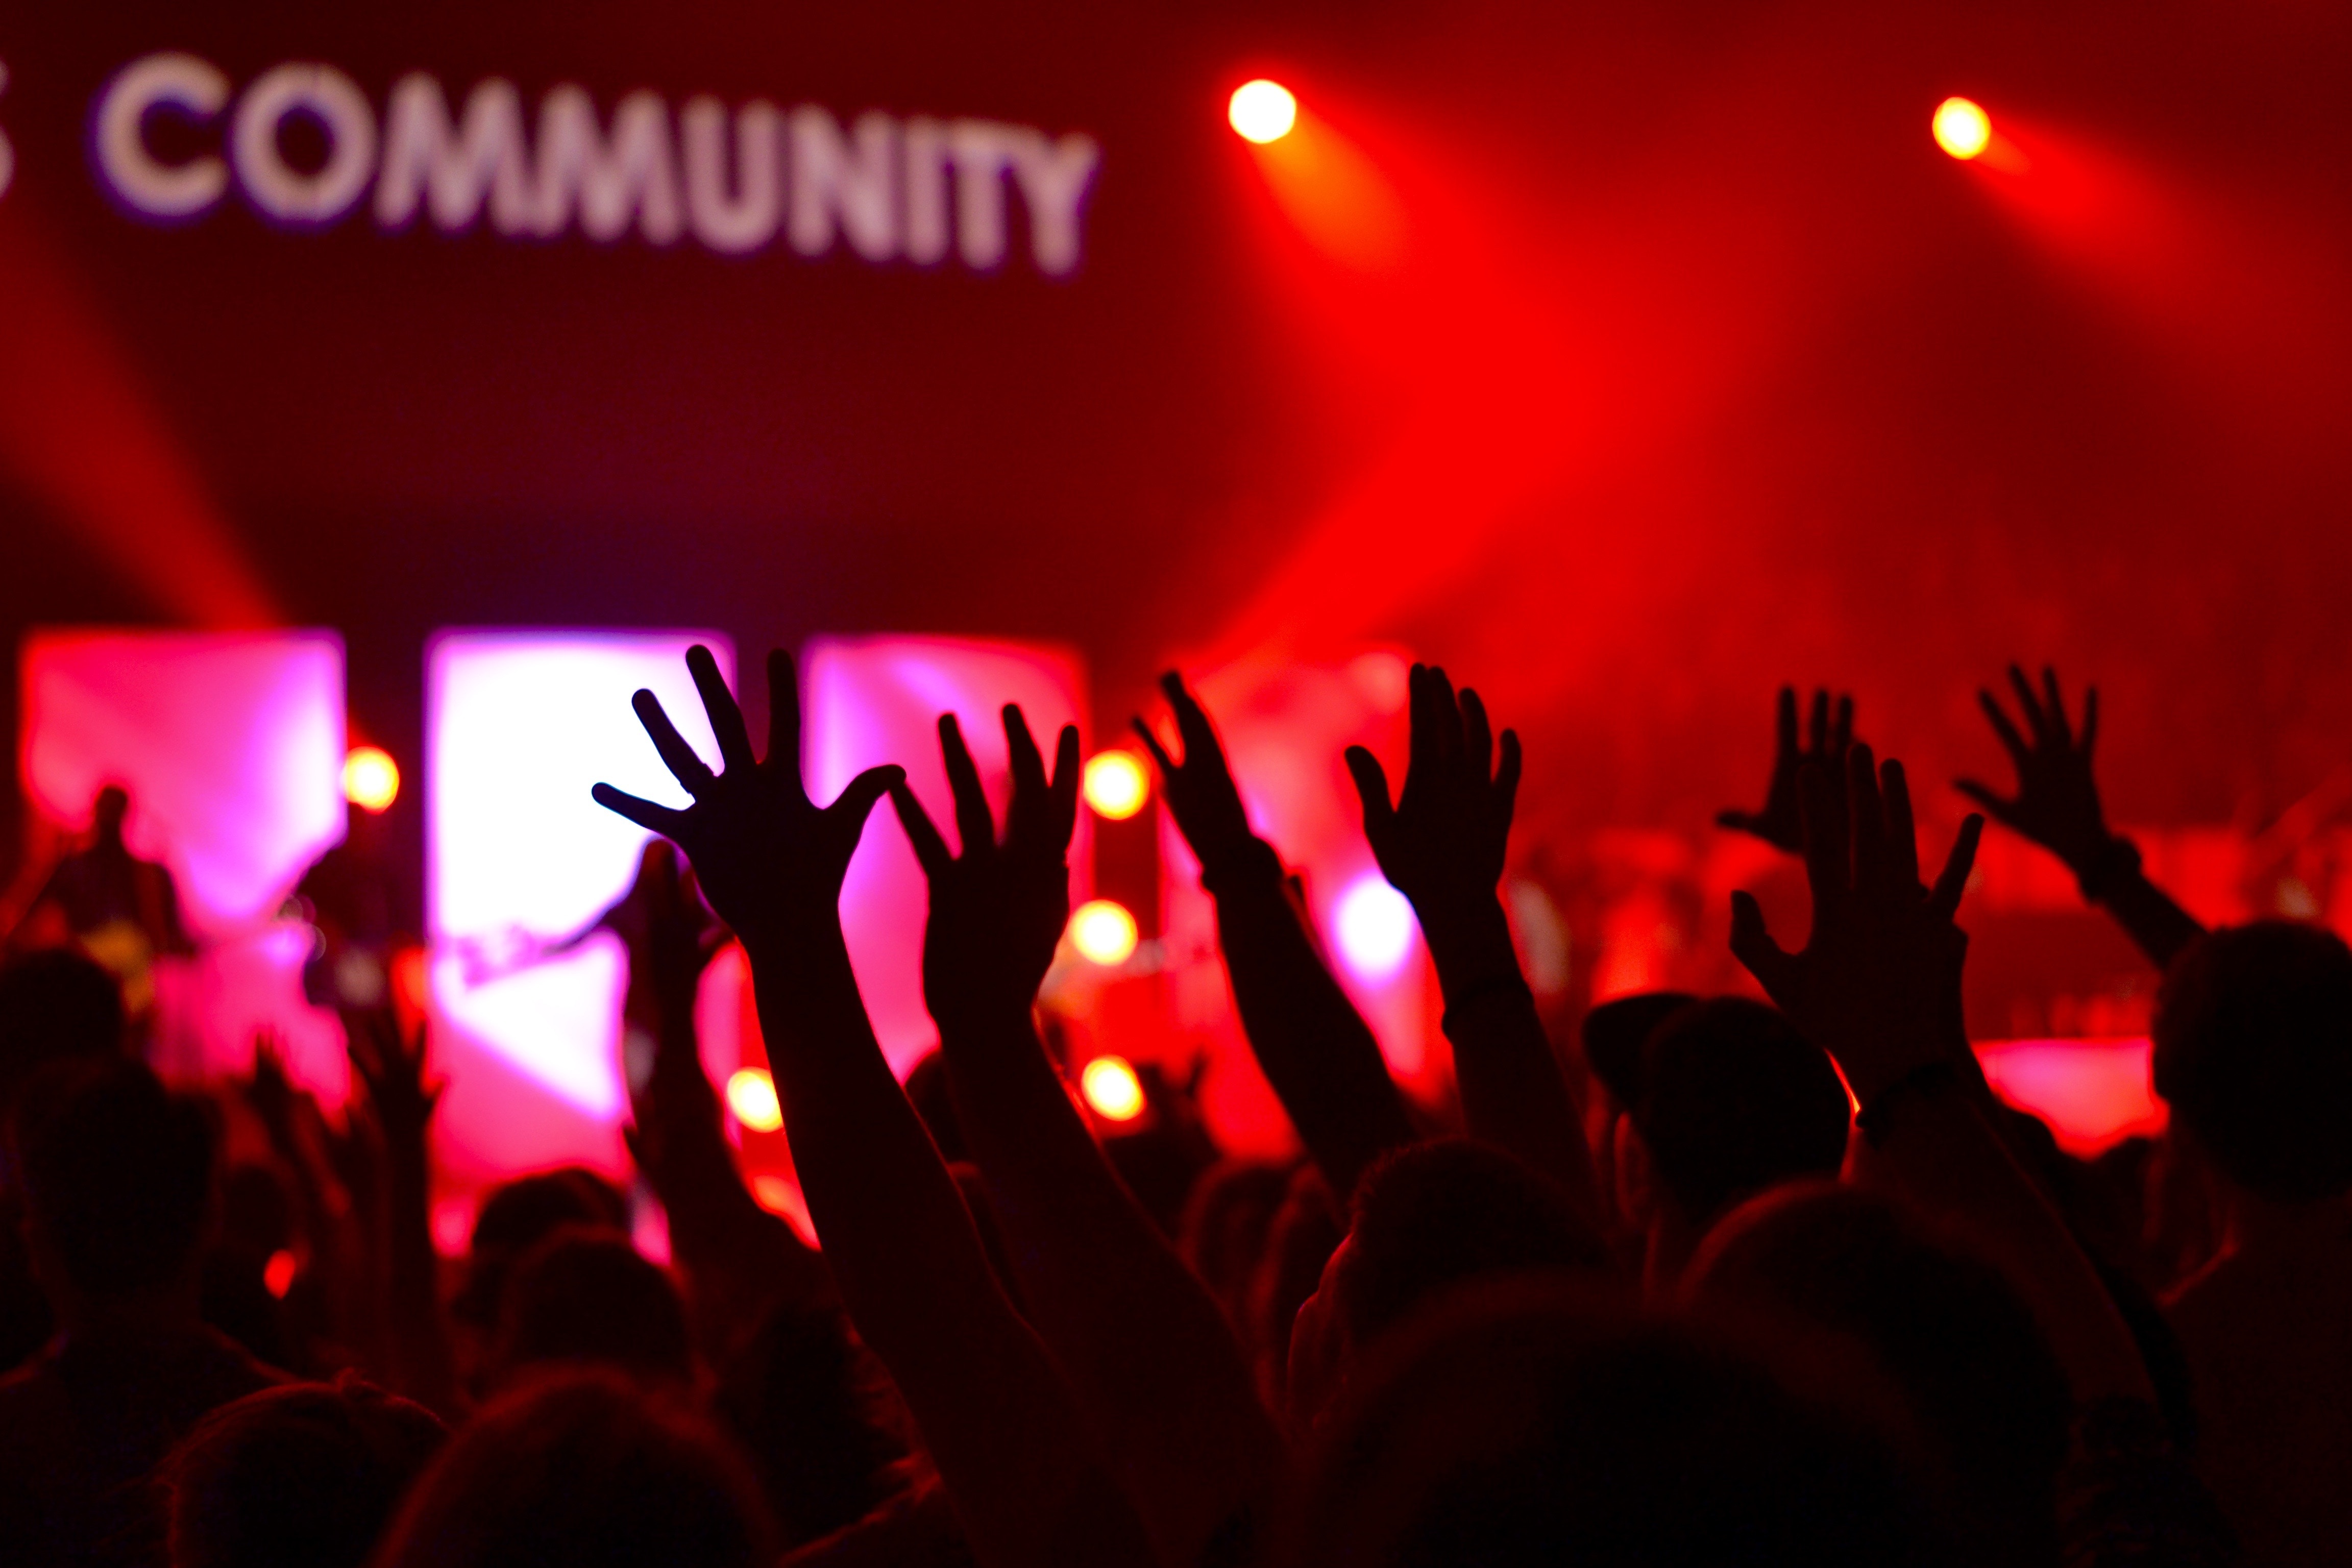 Image of crowd with outstretch hands, and the word "Community" on a sign in the background.